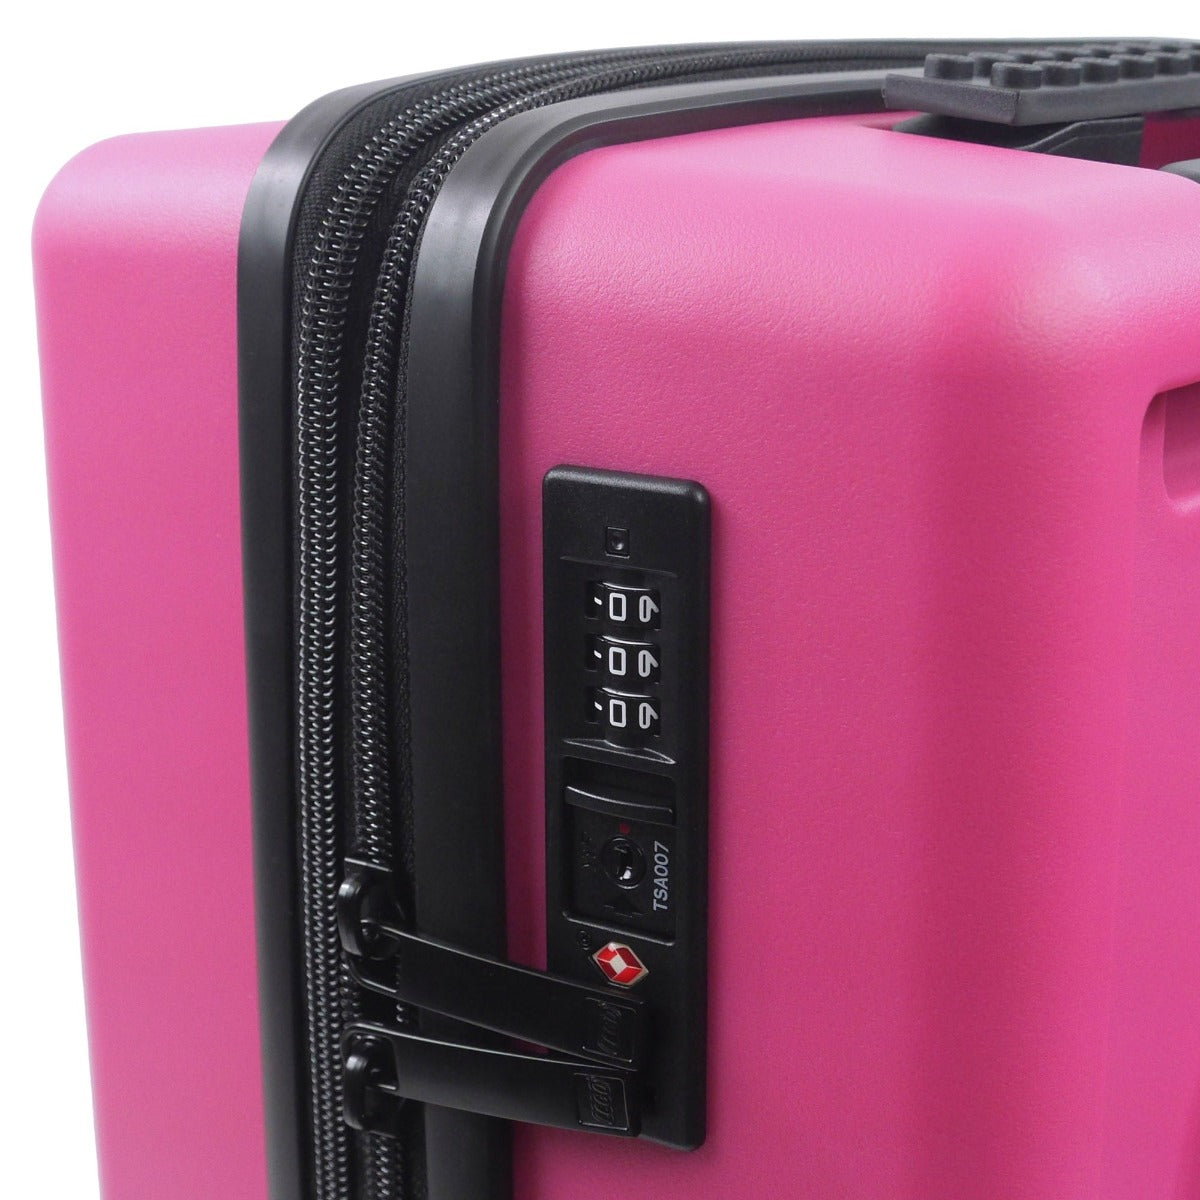 Pink Lego Signature Brick 2X3 trolley expandable 22-inch carry-on rolling luggage for travel